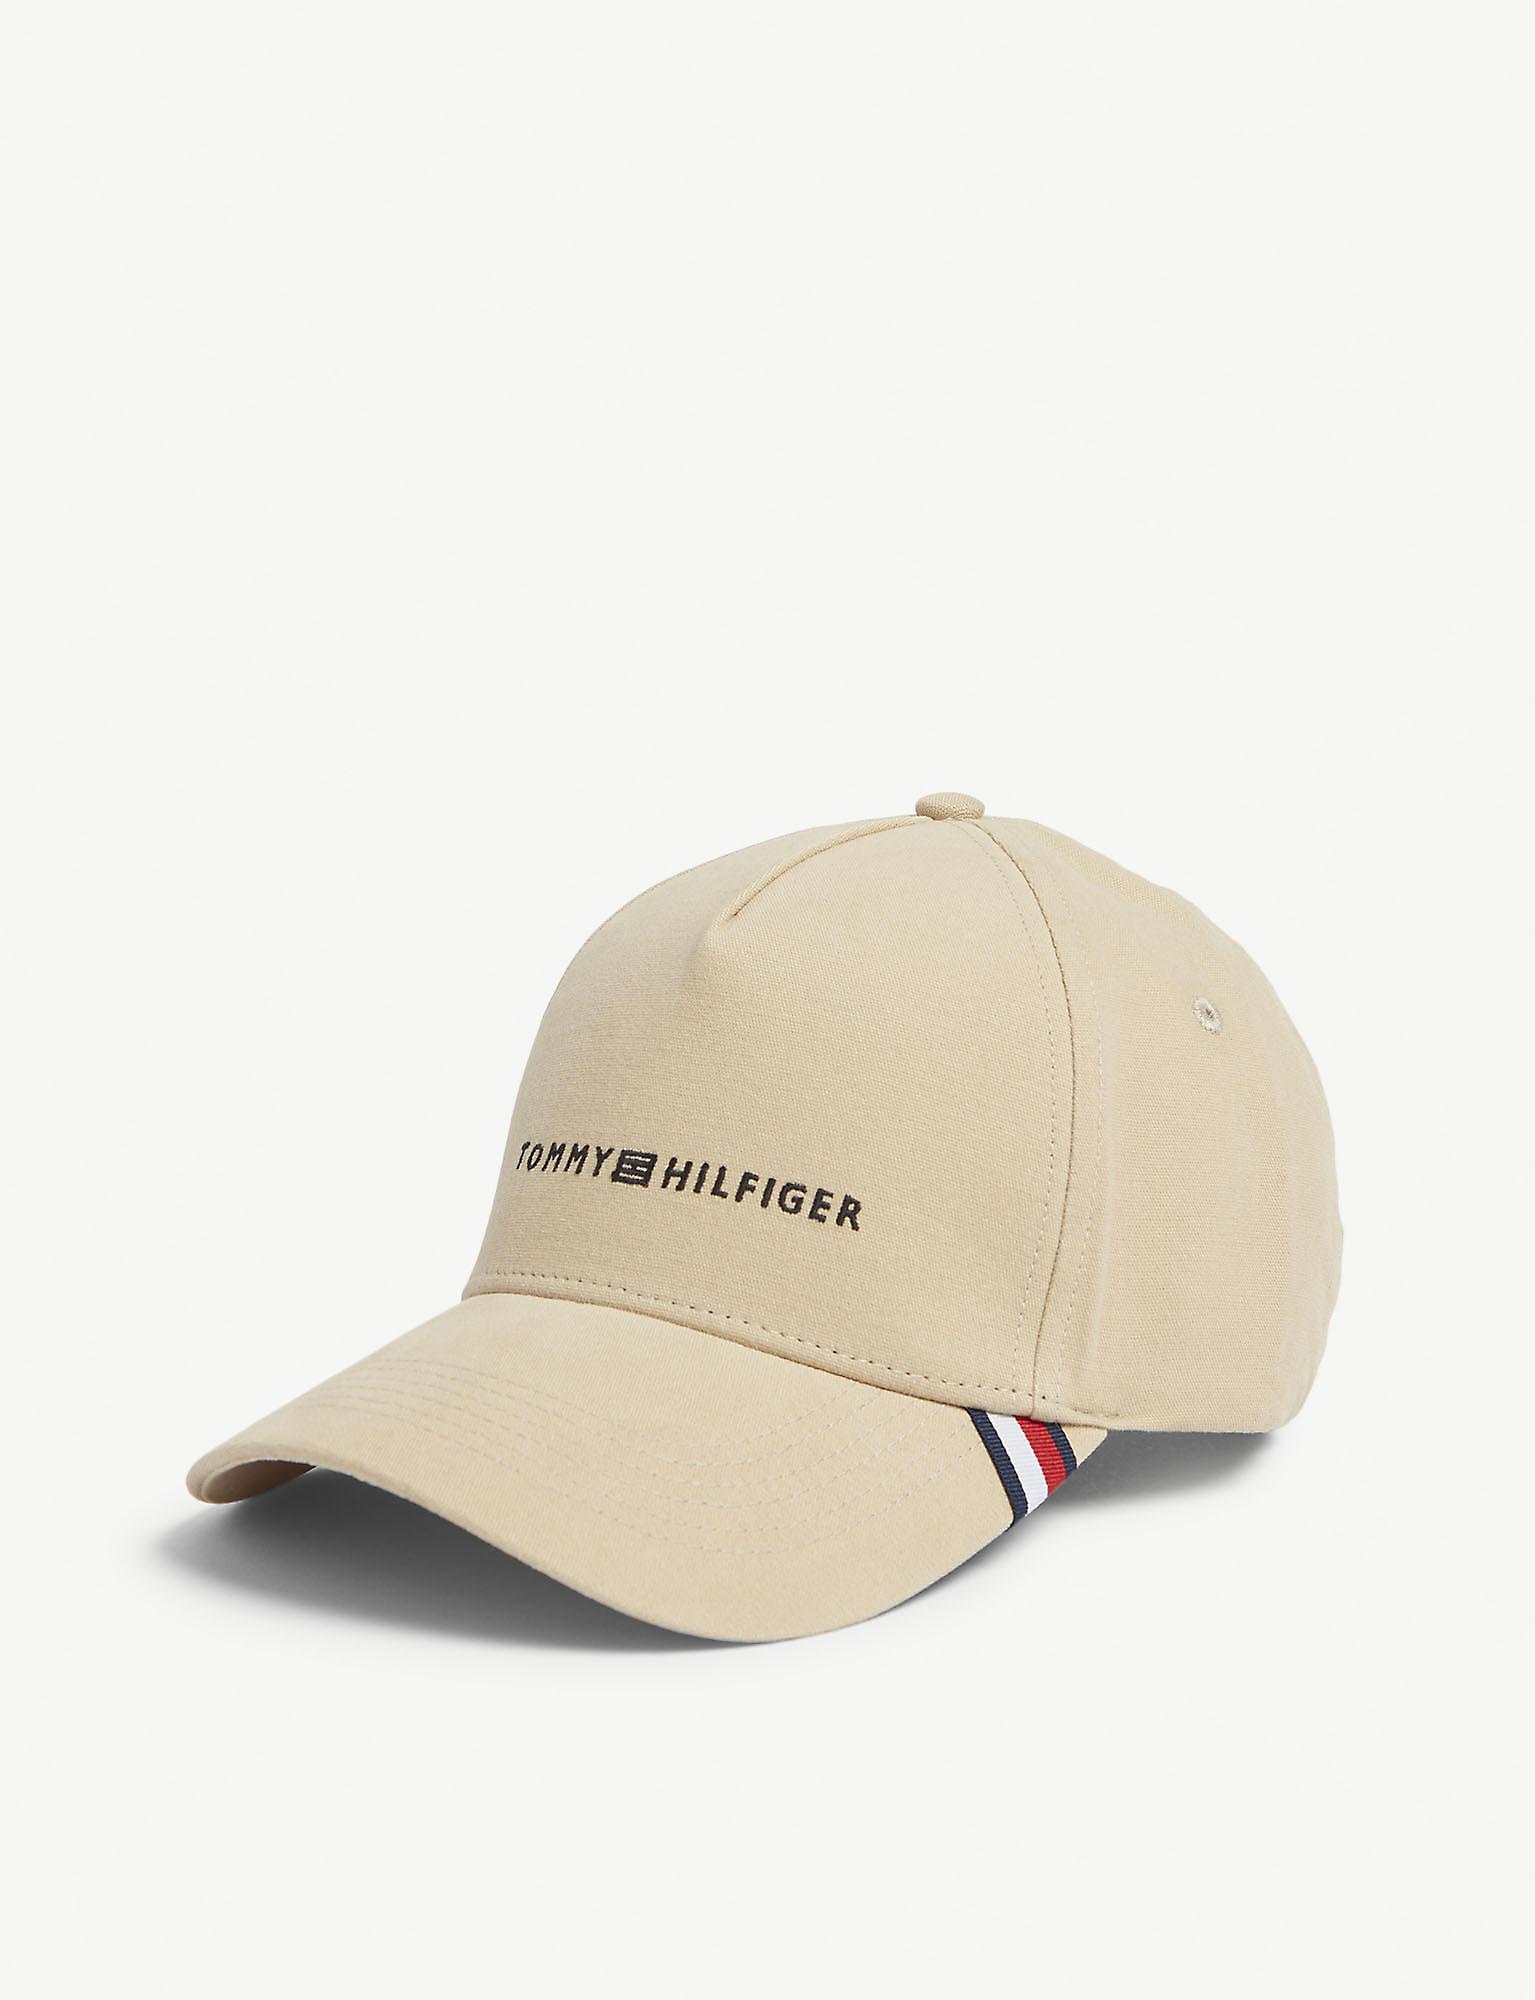 Tommy Hilfiger Uptown Cotton Cap in Khaki (Natural) for Men - Lyst